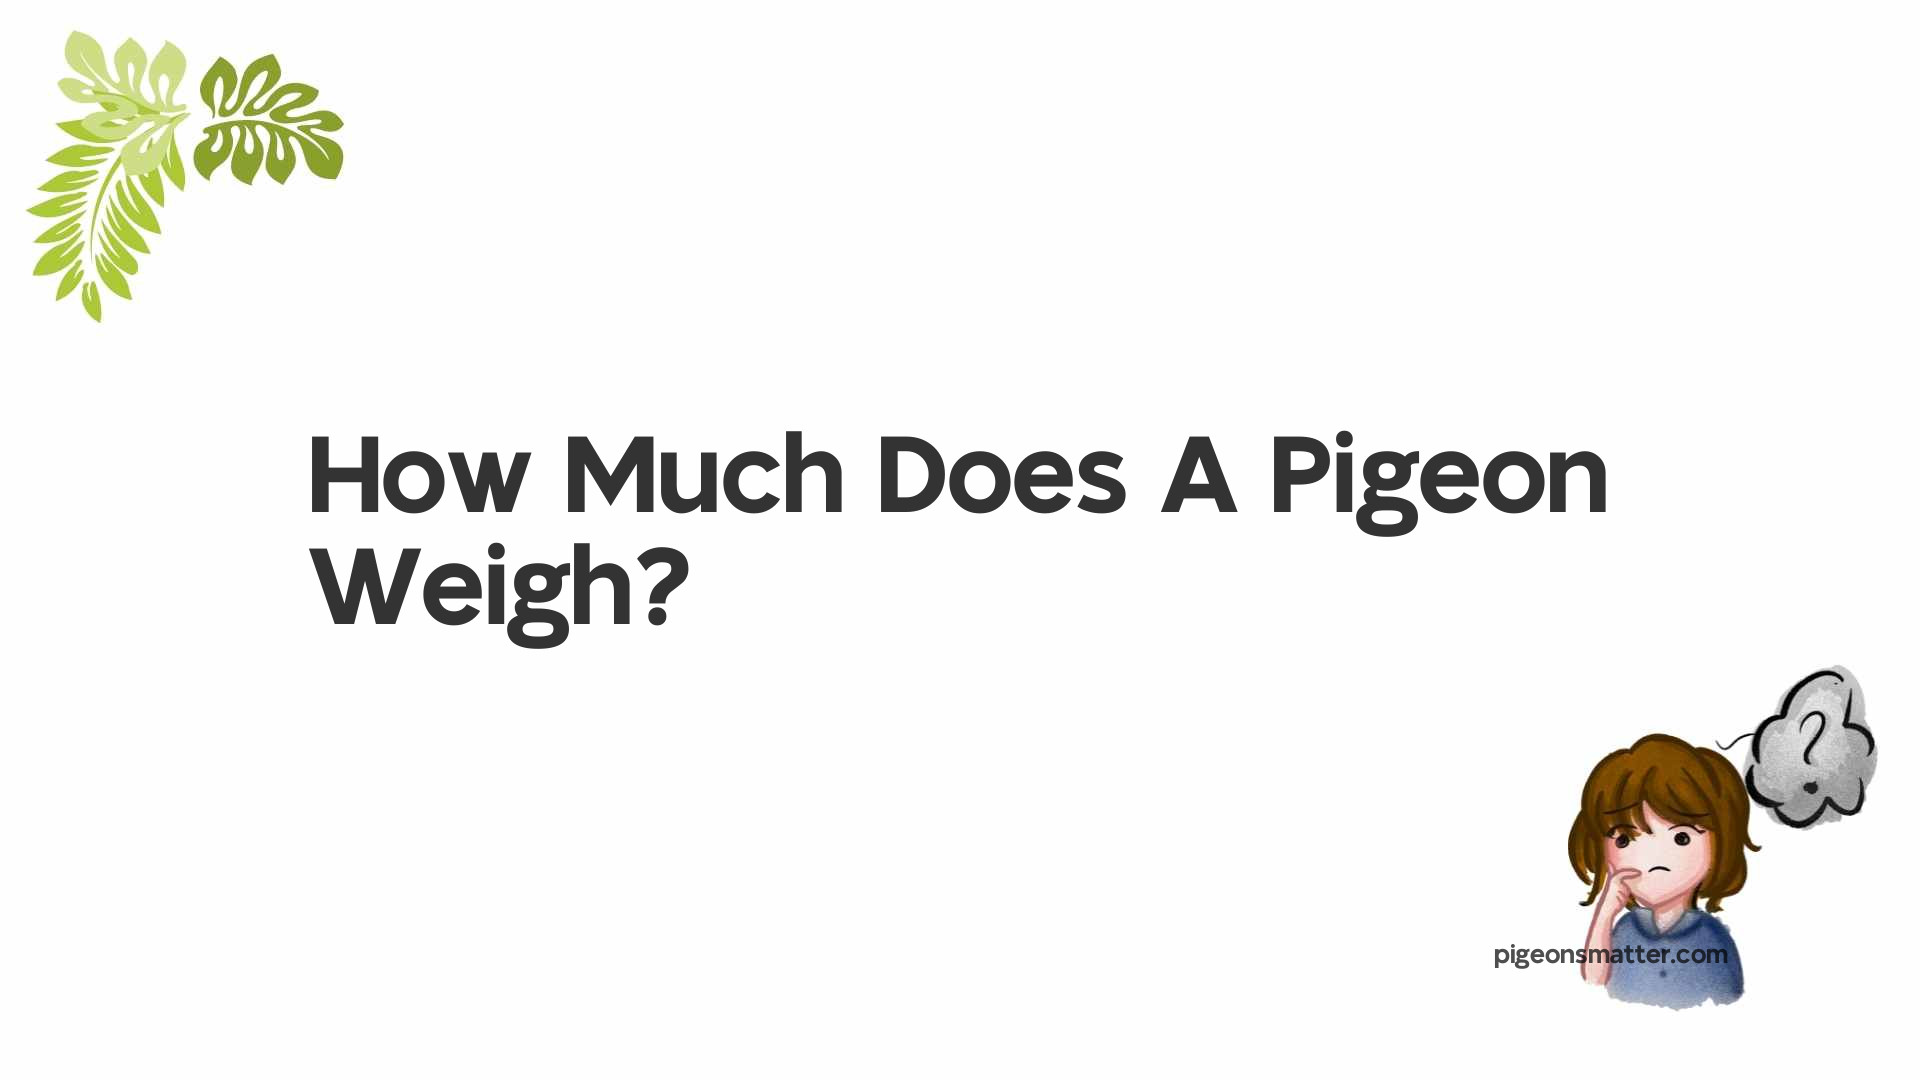 How Much Does A Pigeon Weigh?